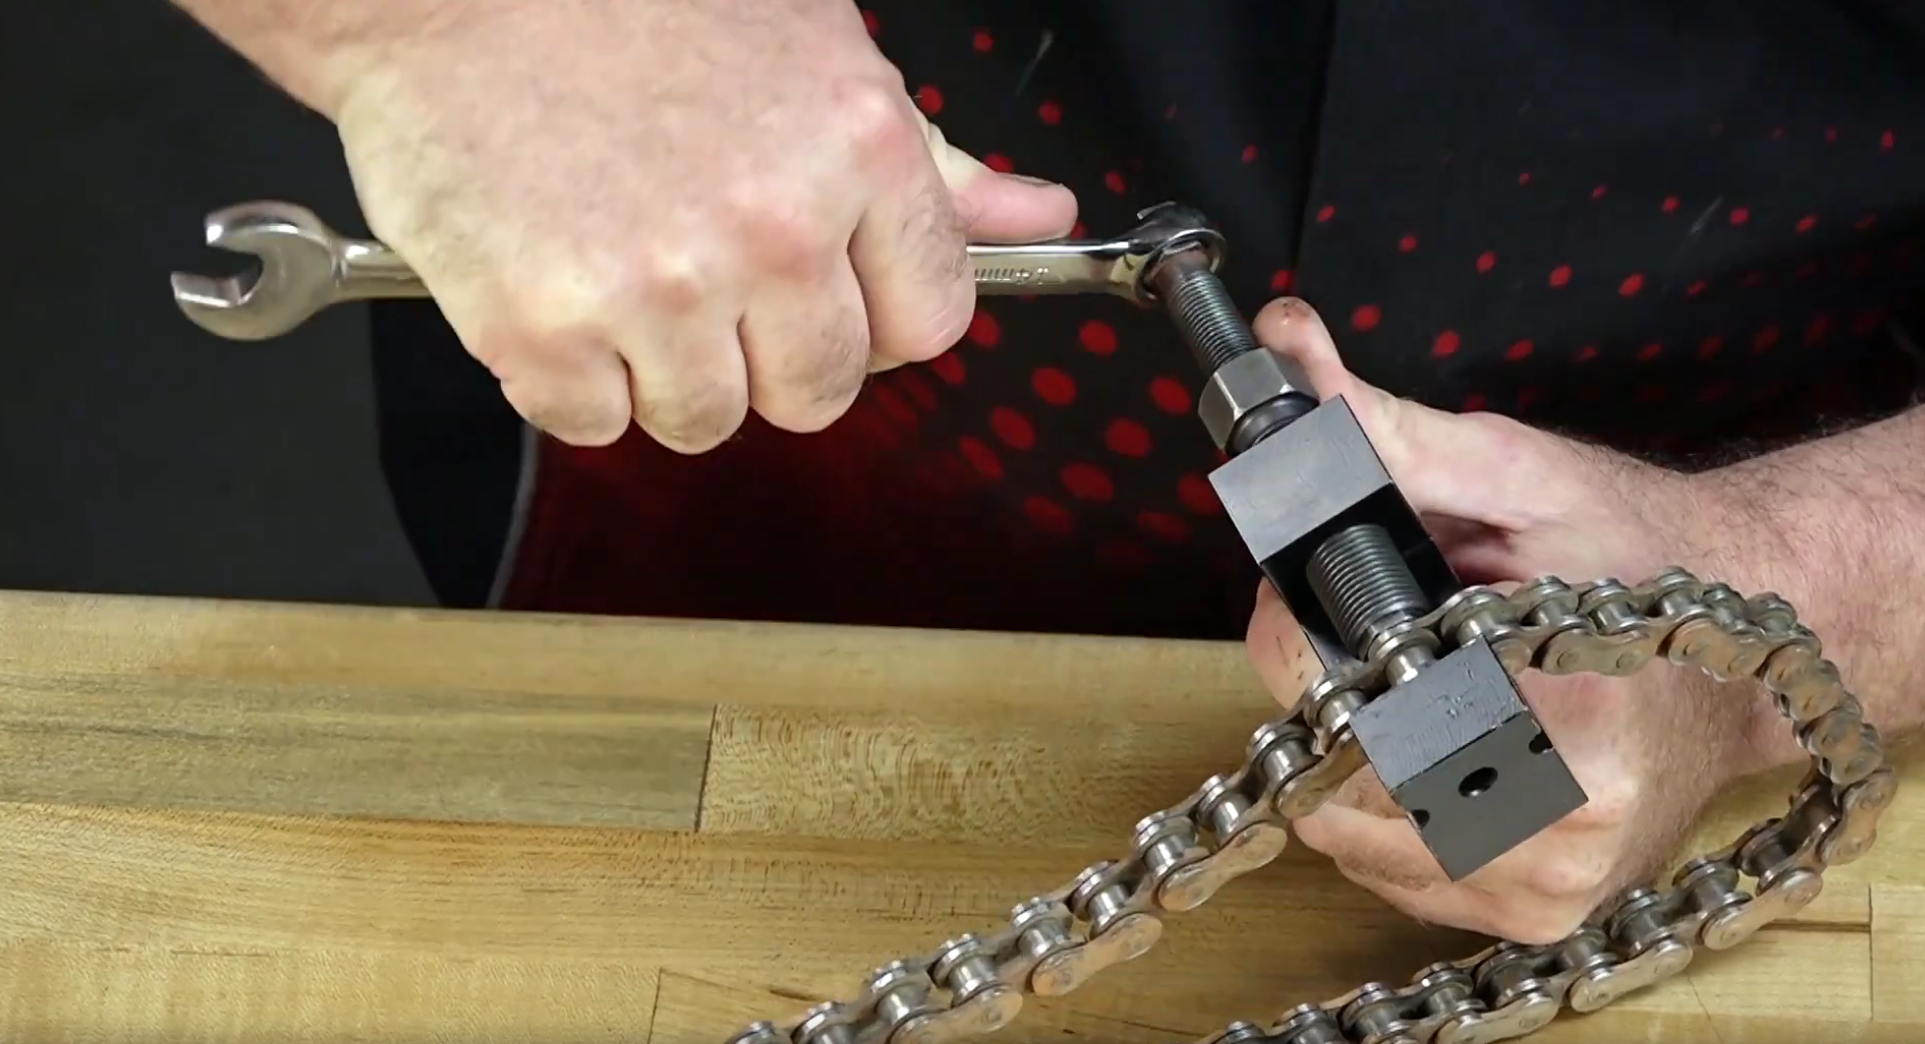 How to Use a Motorcycle Chain Breaker Tool | Partzilla.com